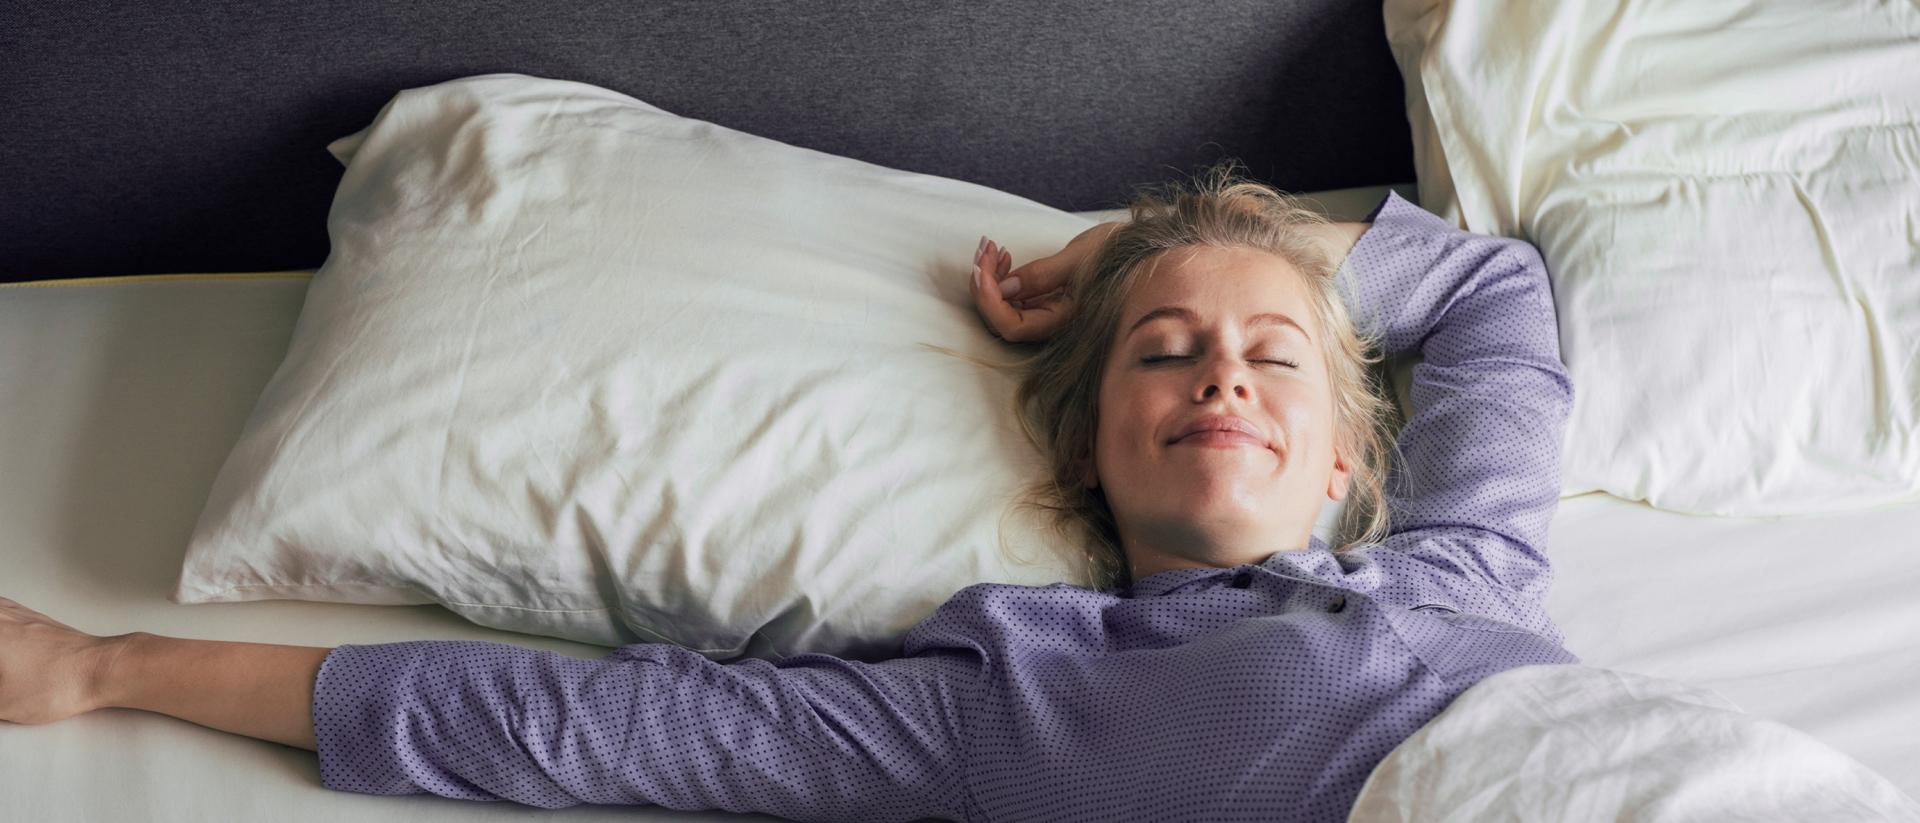 A woman wearing purple pajamas wakes up smiling in a bed with white sheets.